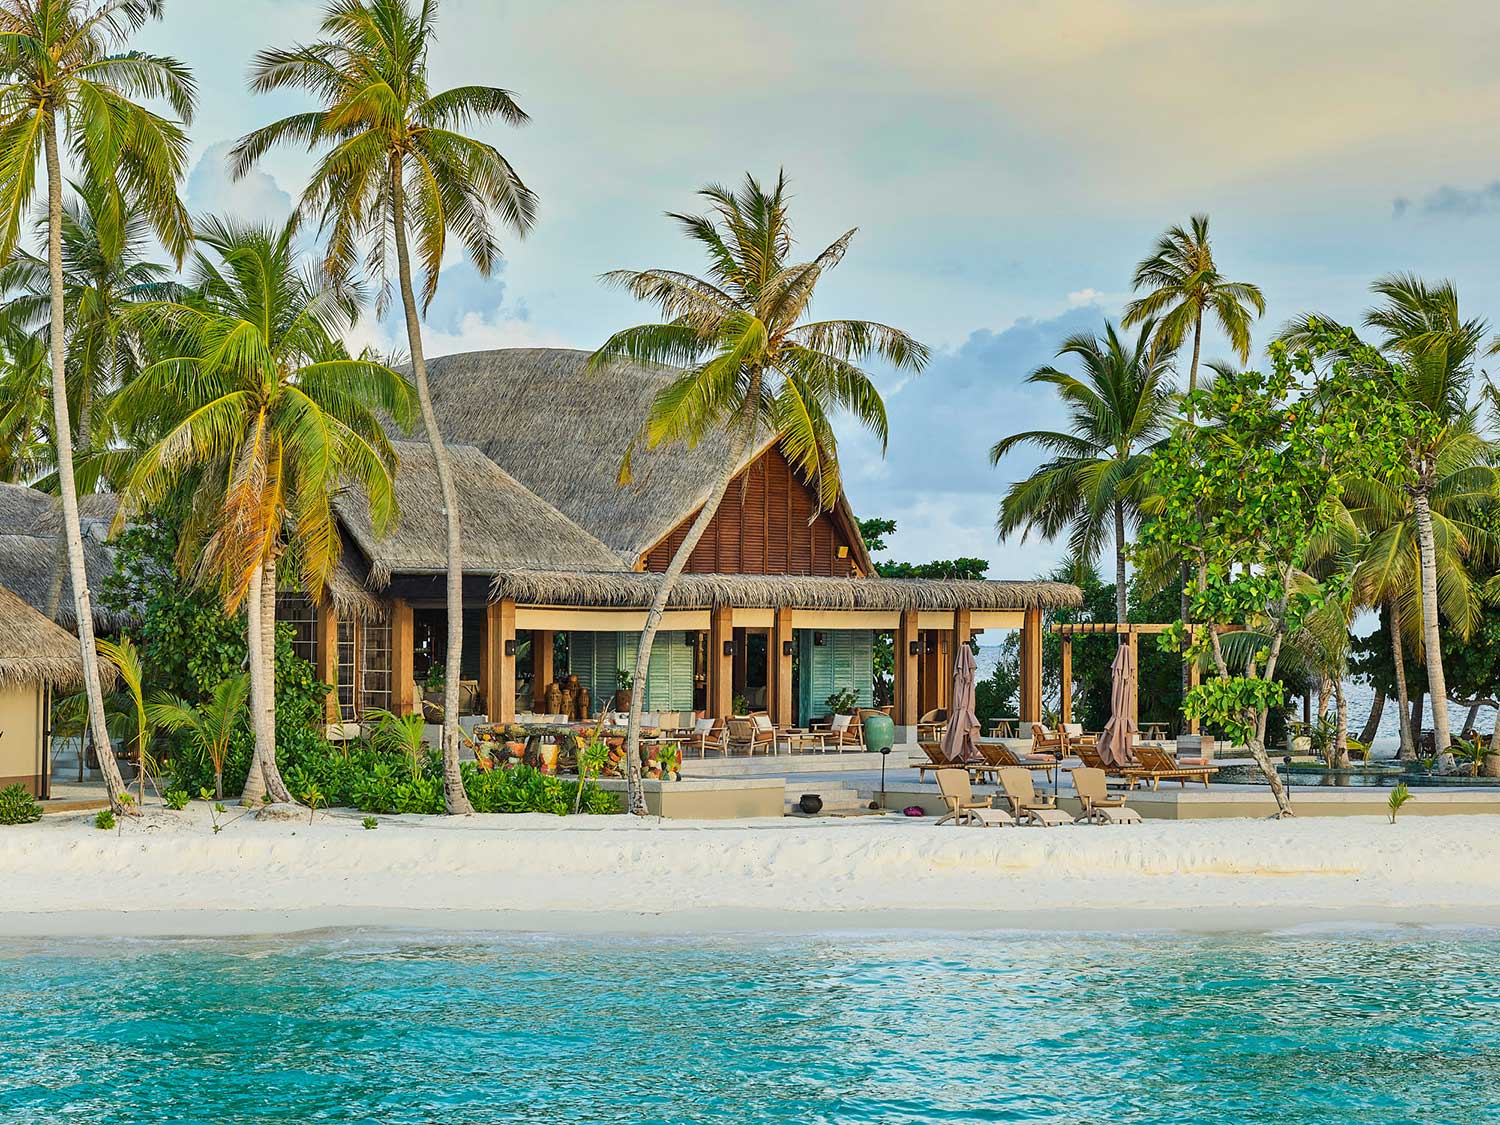 An island beach resort surrounded by palm trees.